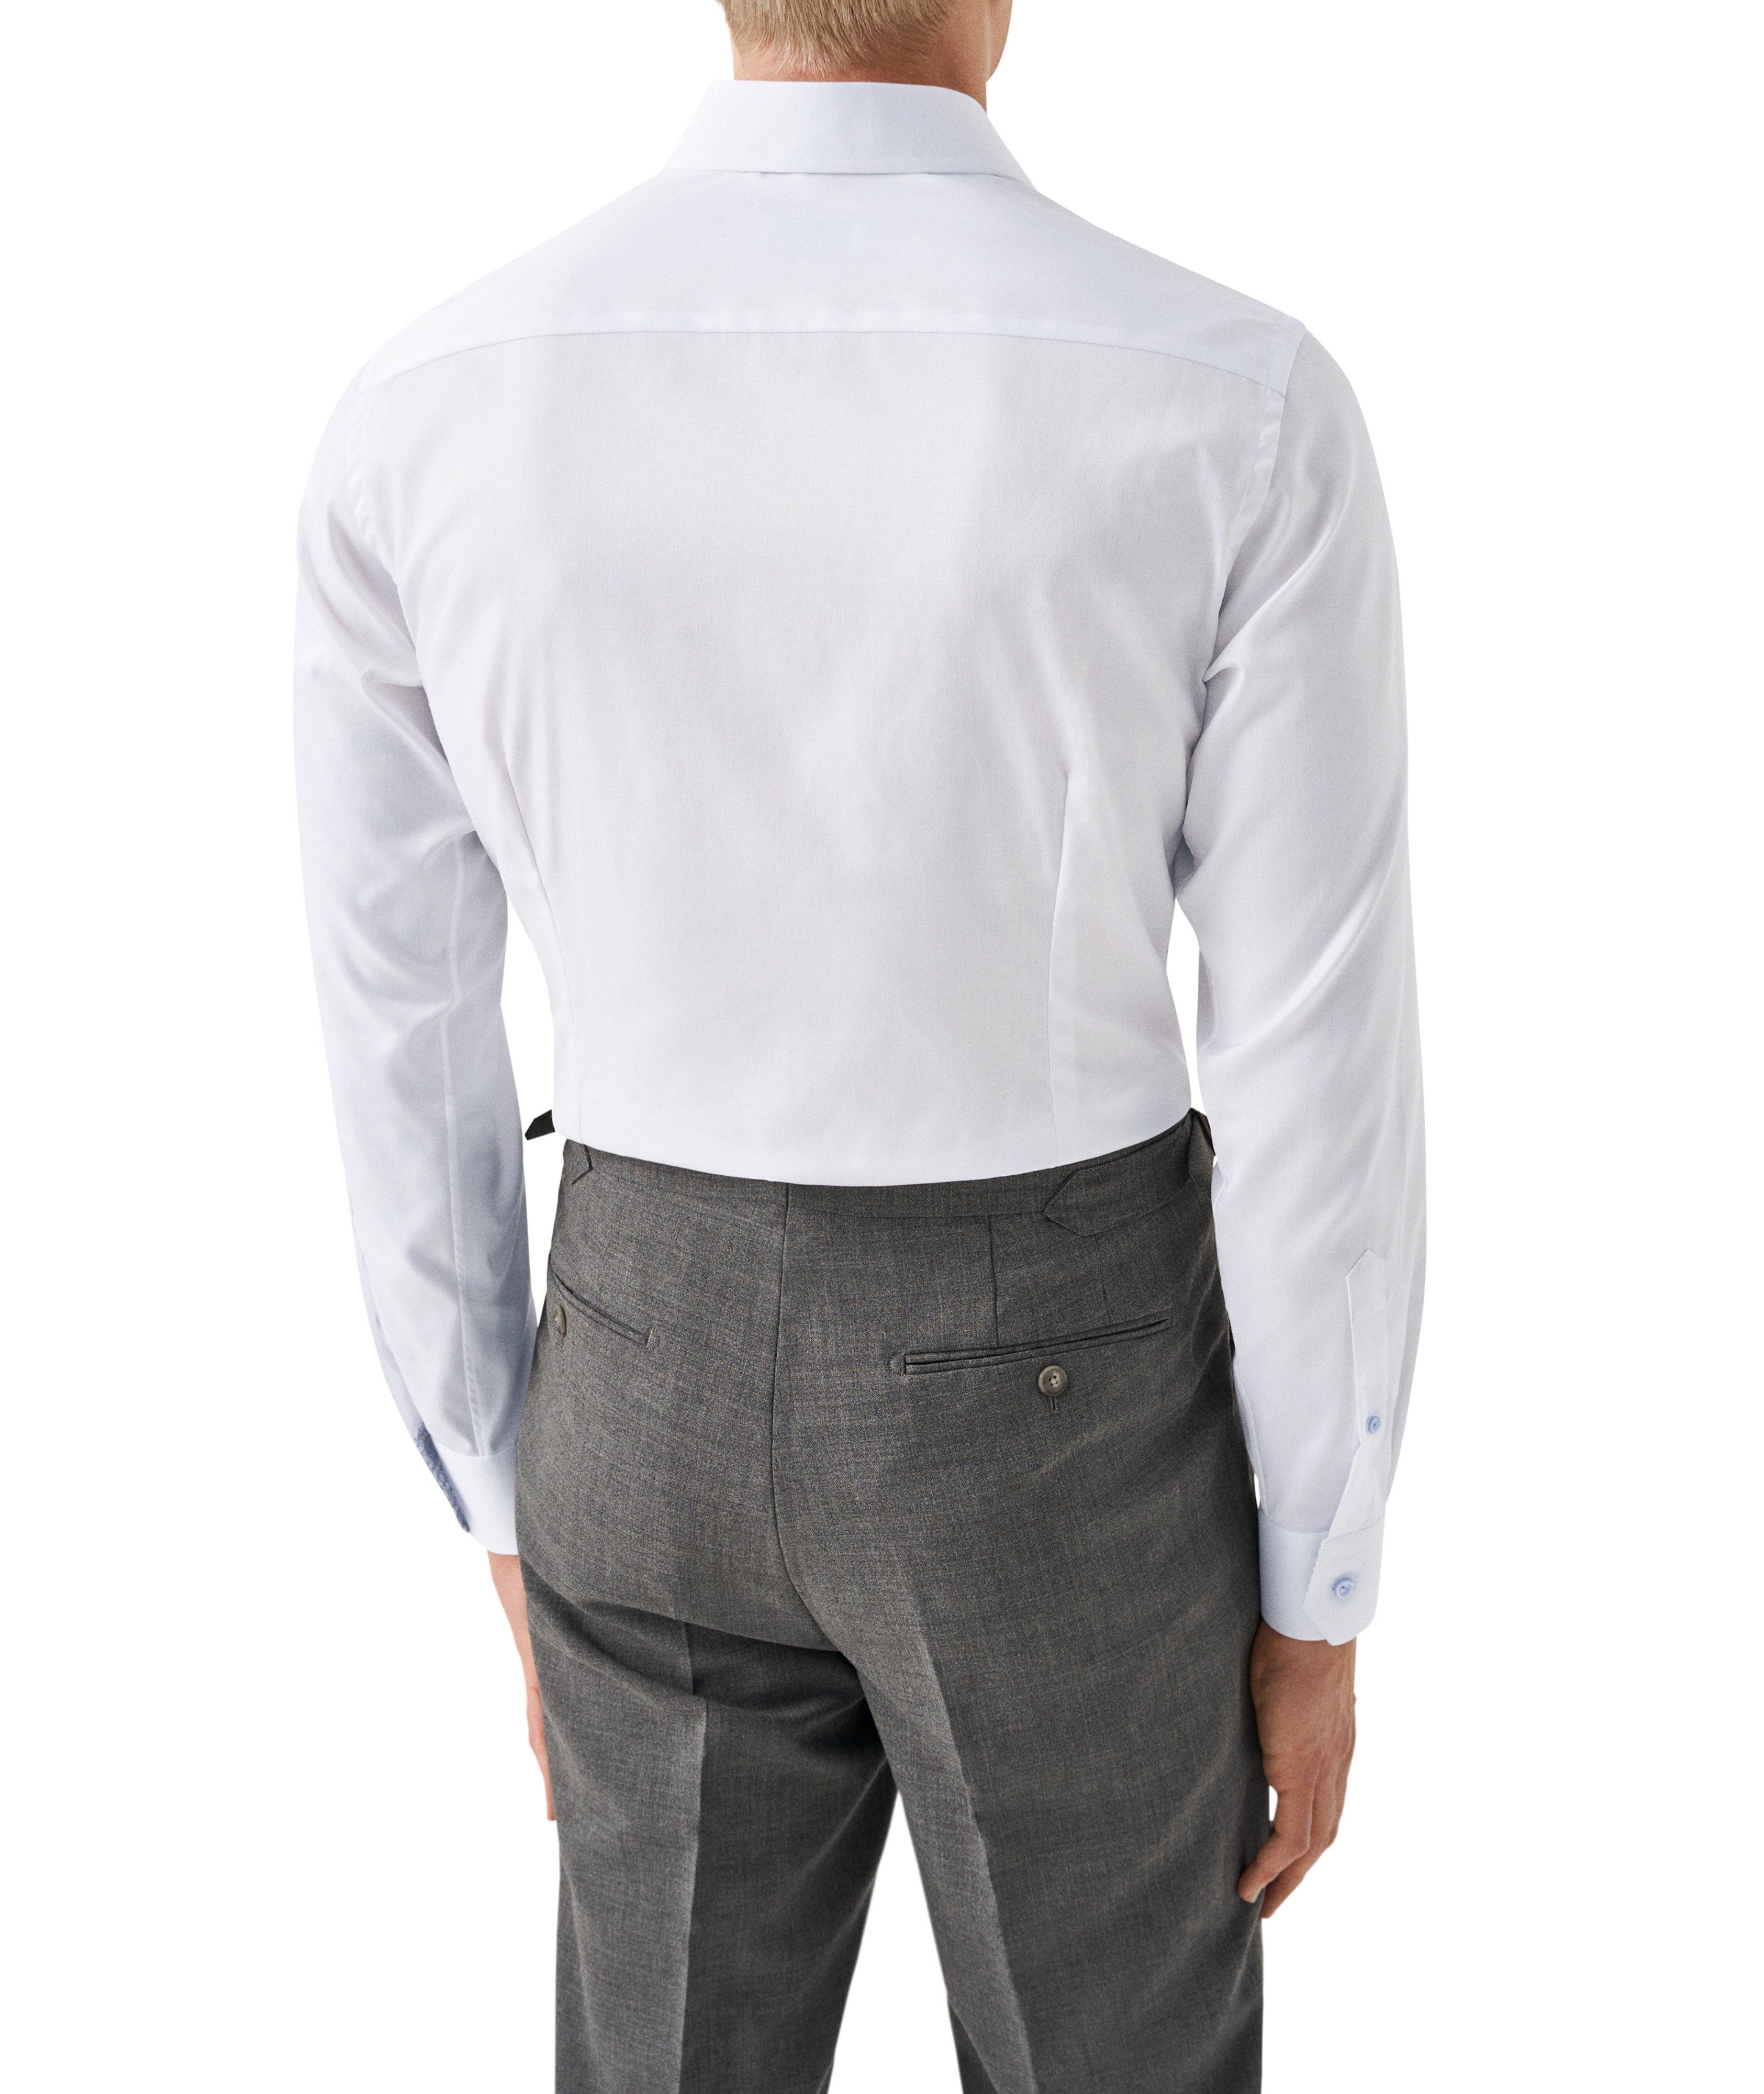 Slim Fit Twill Shirt with Geometric Contrast Details image 4